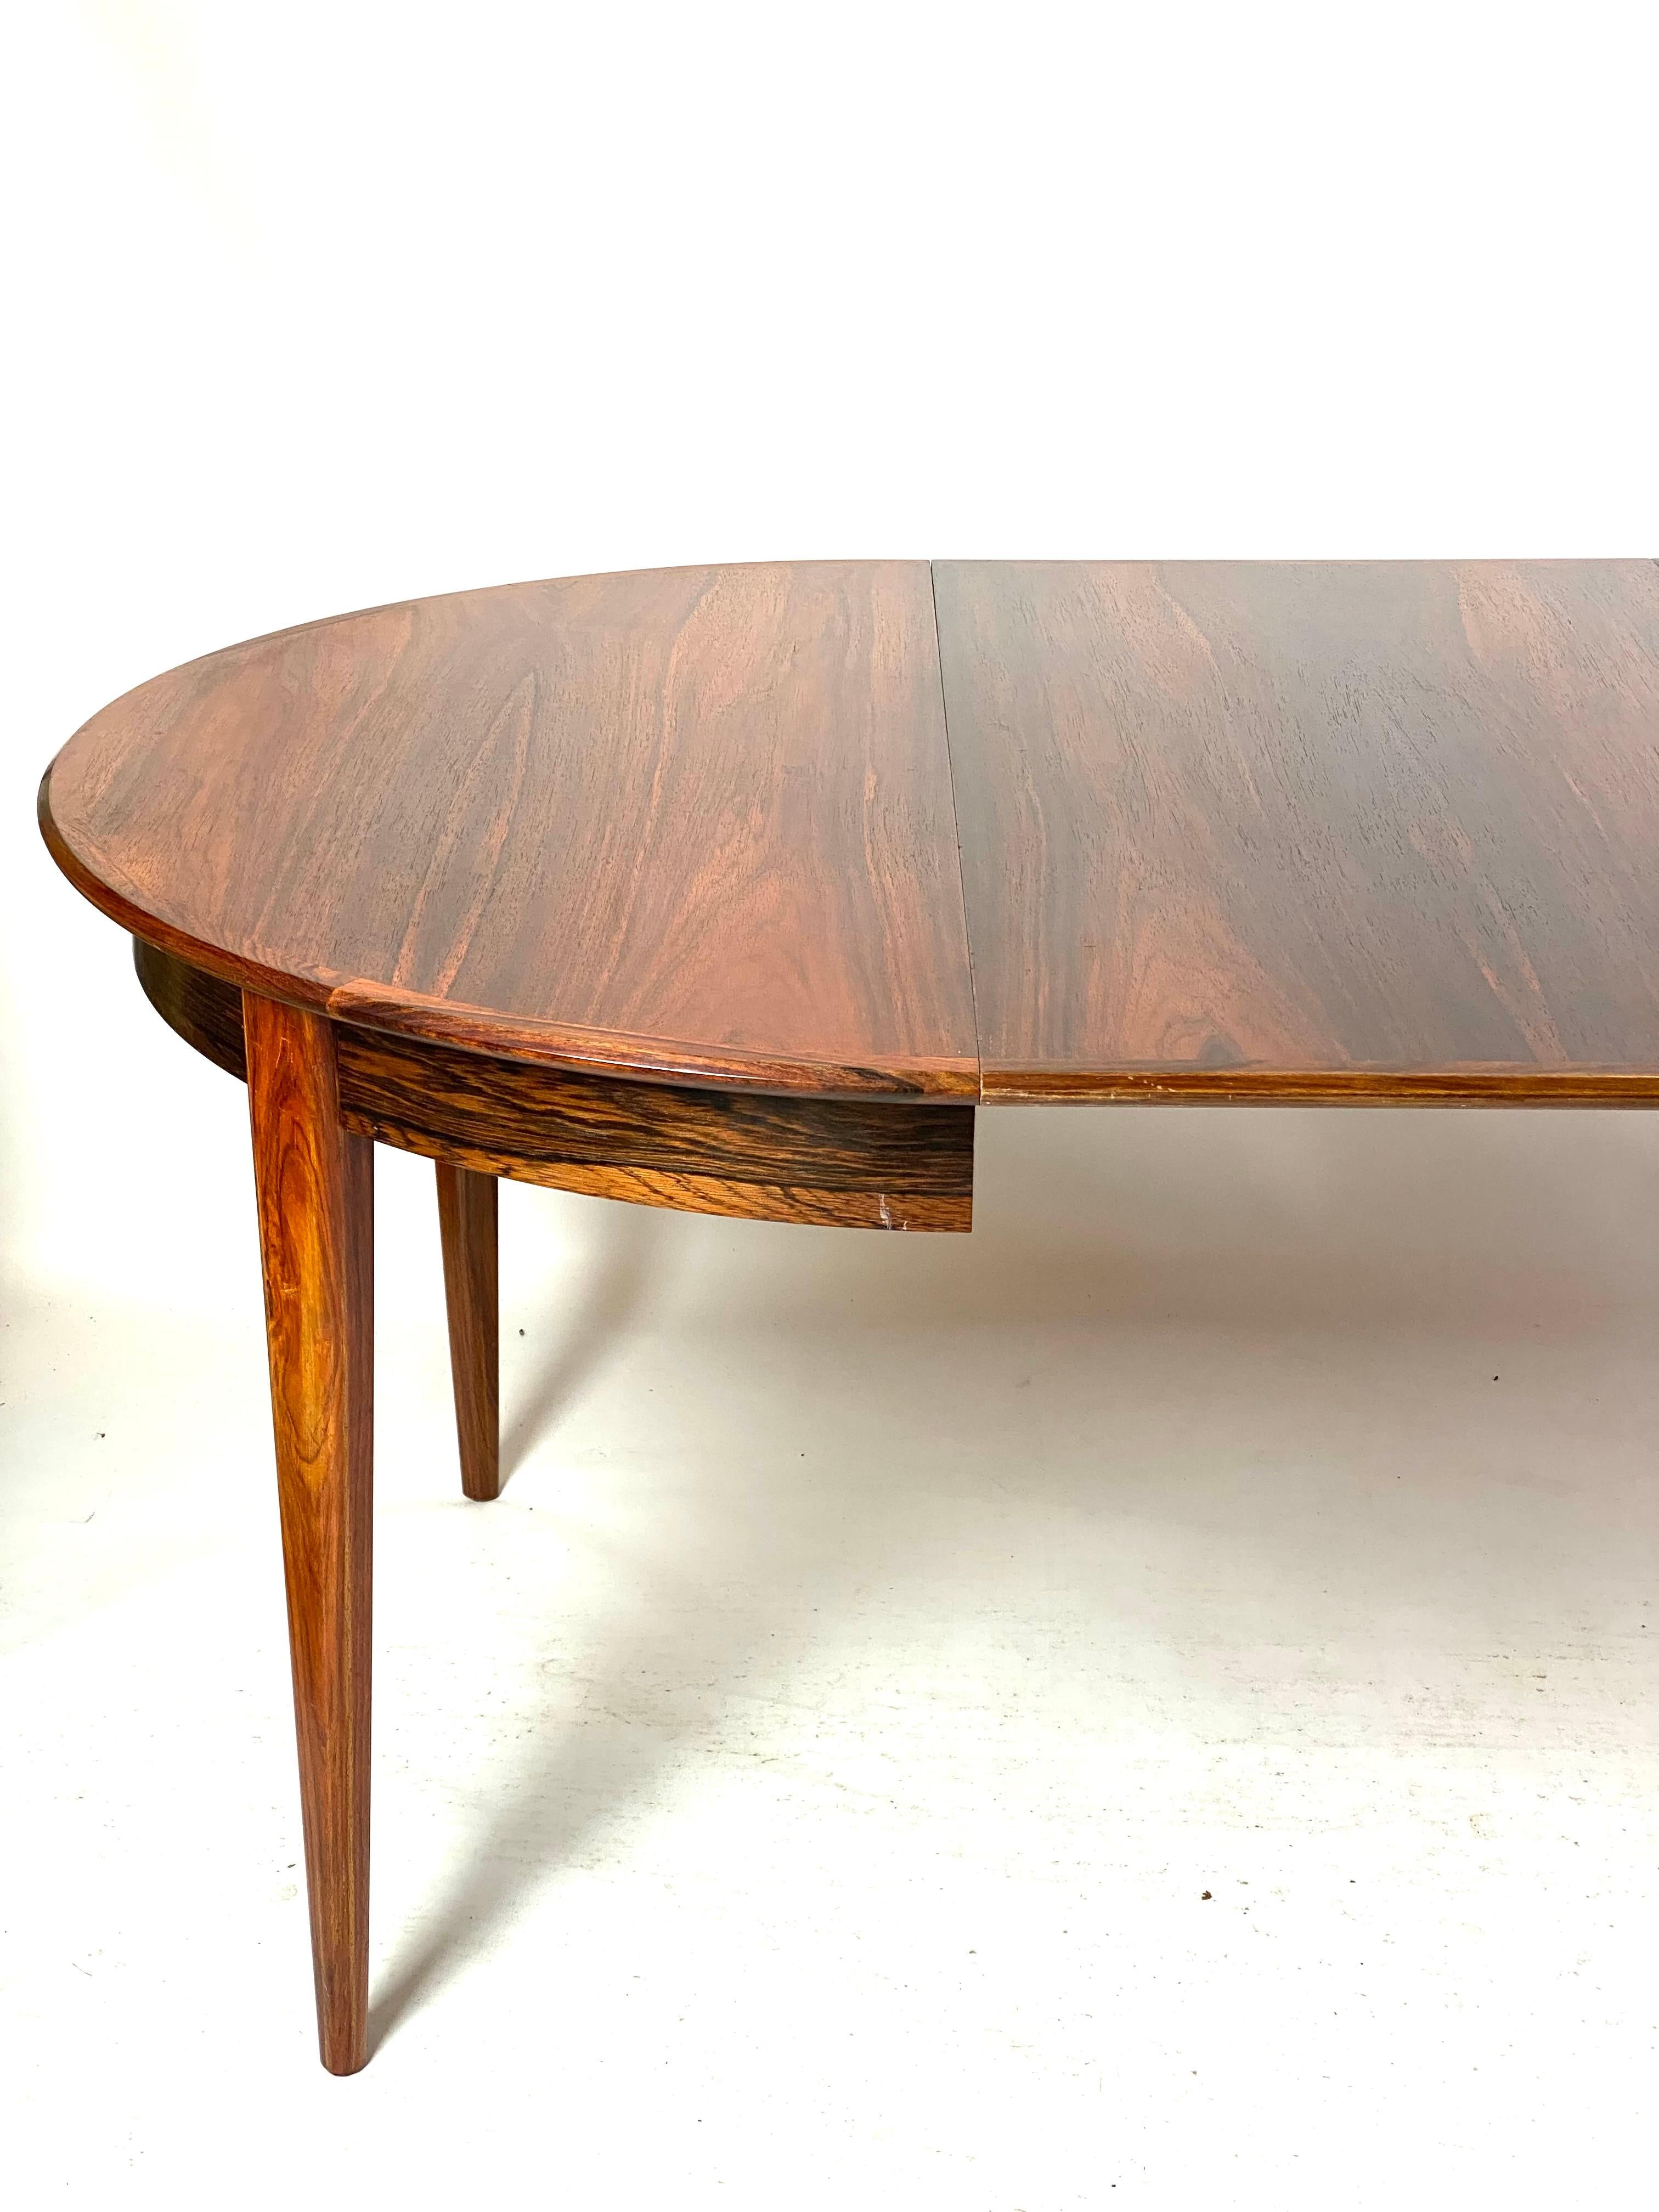 The rosewood dining table, created by Danish design from the 1960s, is an iconic piece of furniture that encapsulates the era's elegant and modern aesthetics.

The rosewood gives the table a warm and deep color, while its natural veins and patterns